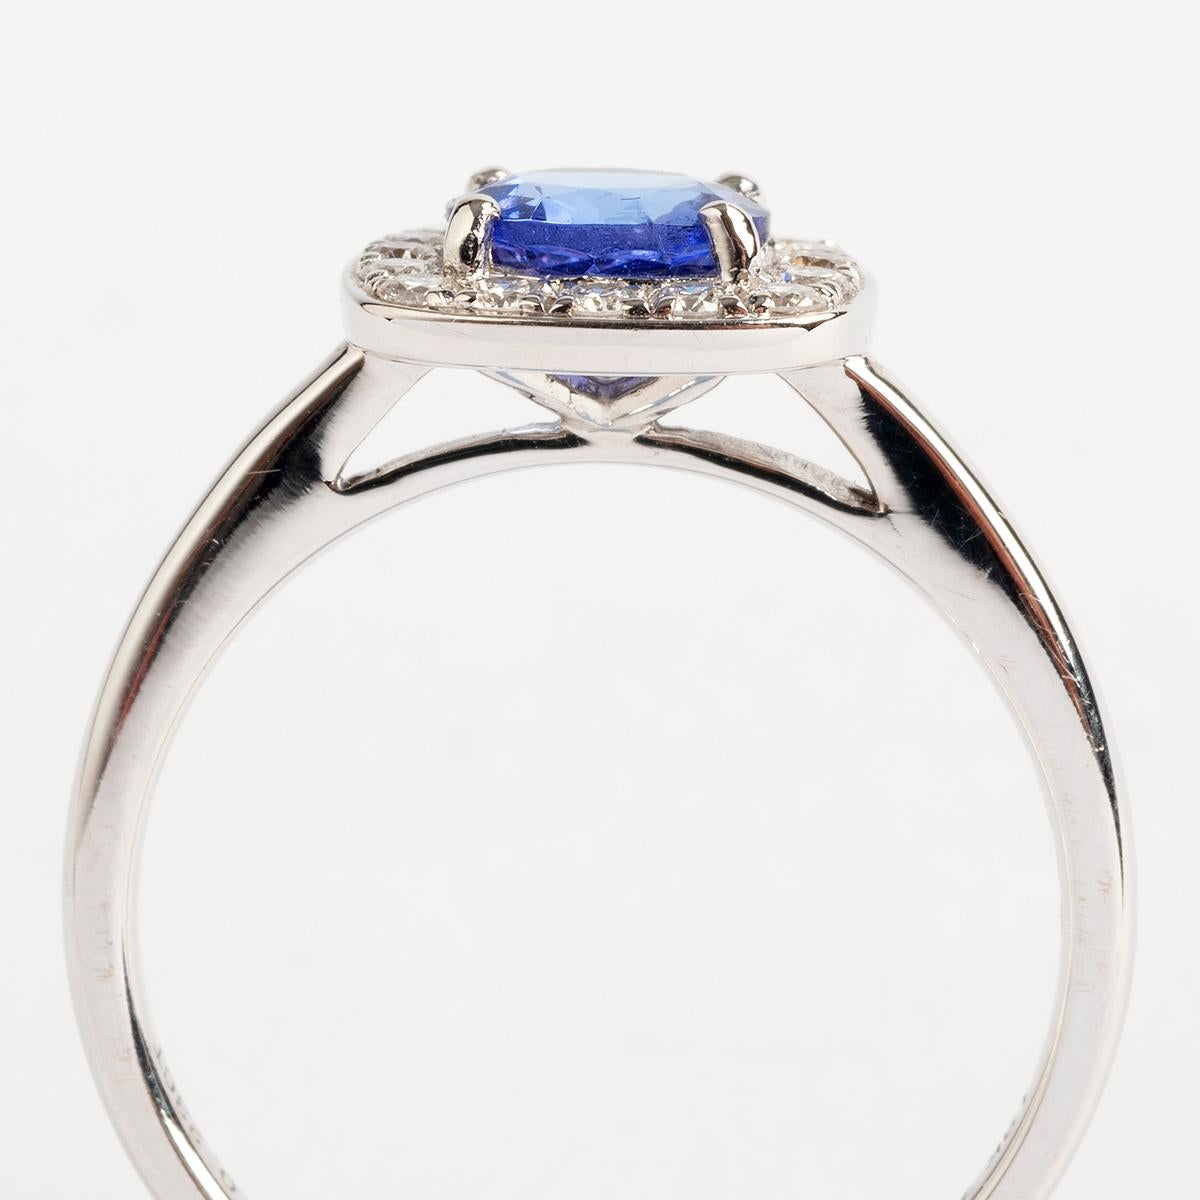 Stunning Tanzanite & Diamond Cluster Ring Hallmarked London 2015 In Excellent Condition For Sale In Canterbury, GB